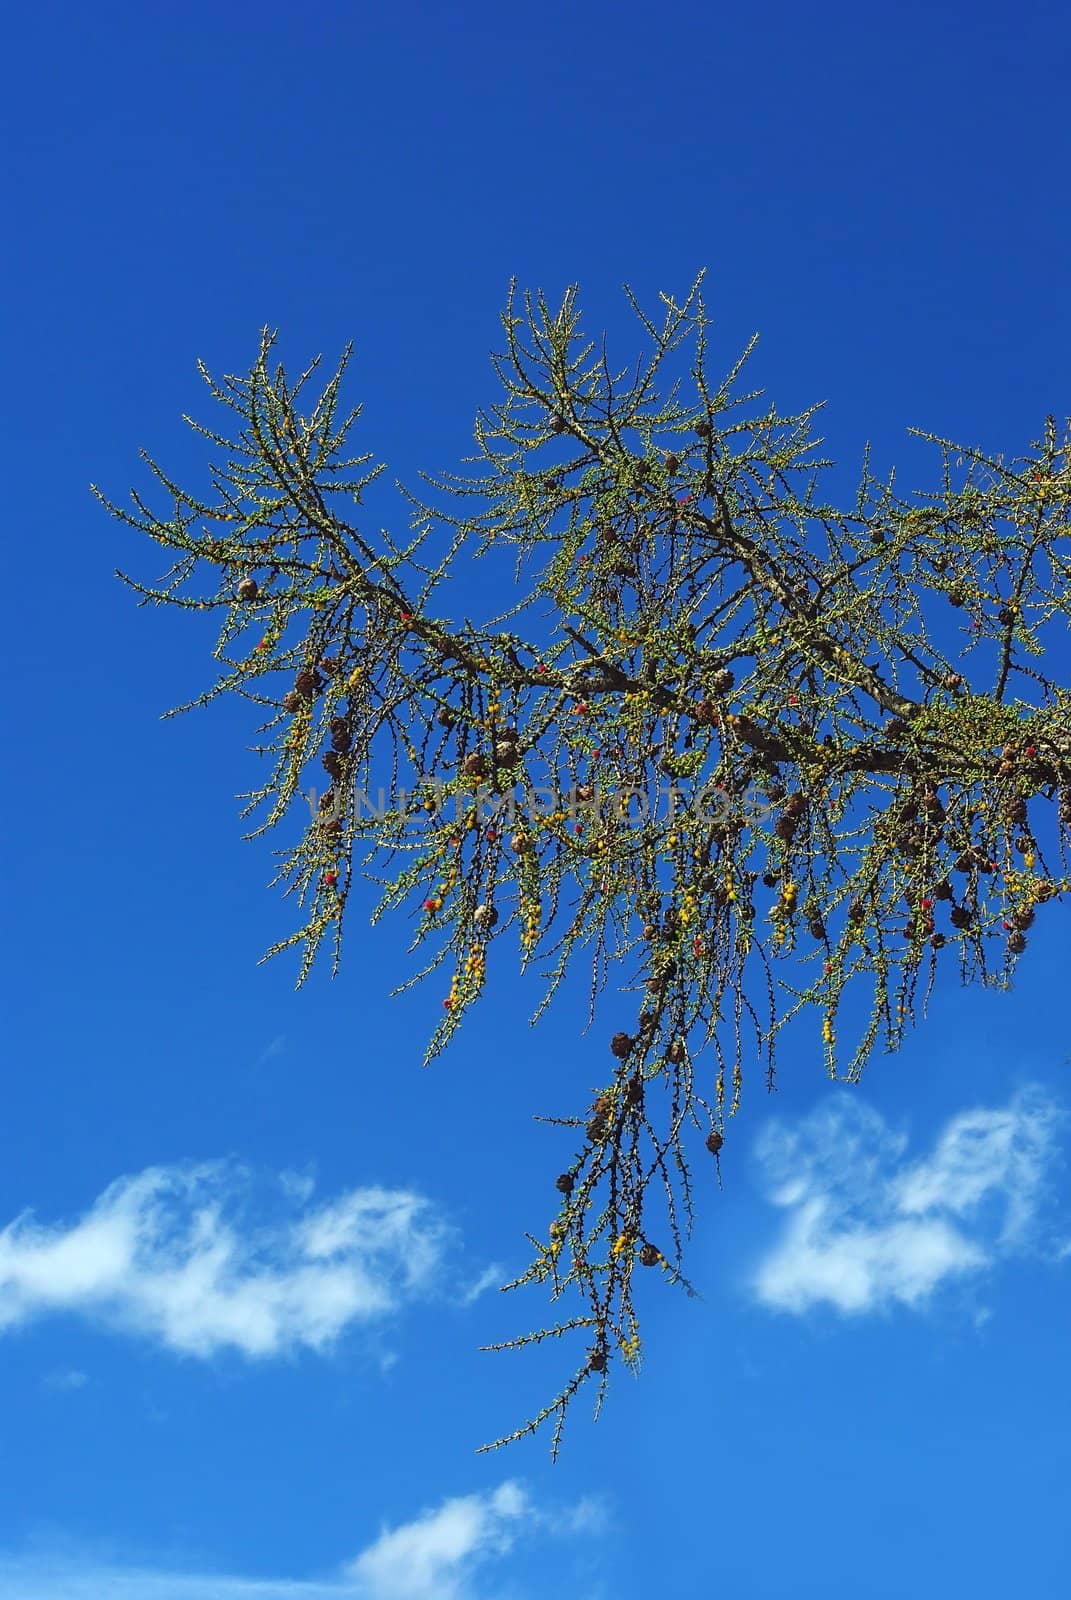 Larch cone on a branch with needles against the blue sky